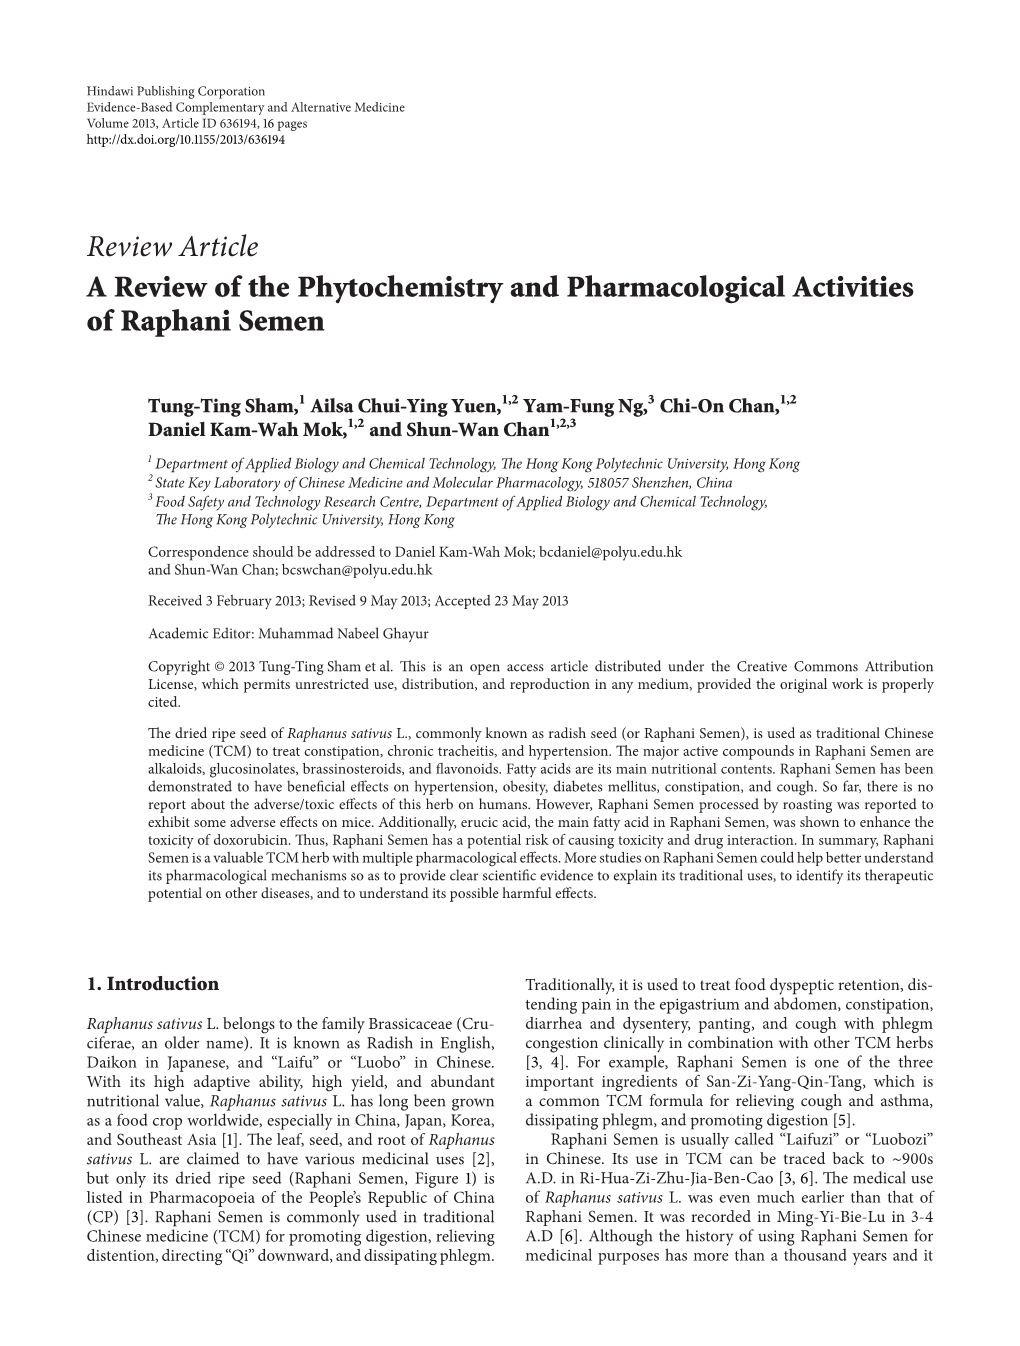 A Review of the Phytochemistry and Pharmacological Activities of Raphani Semen